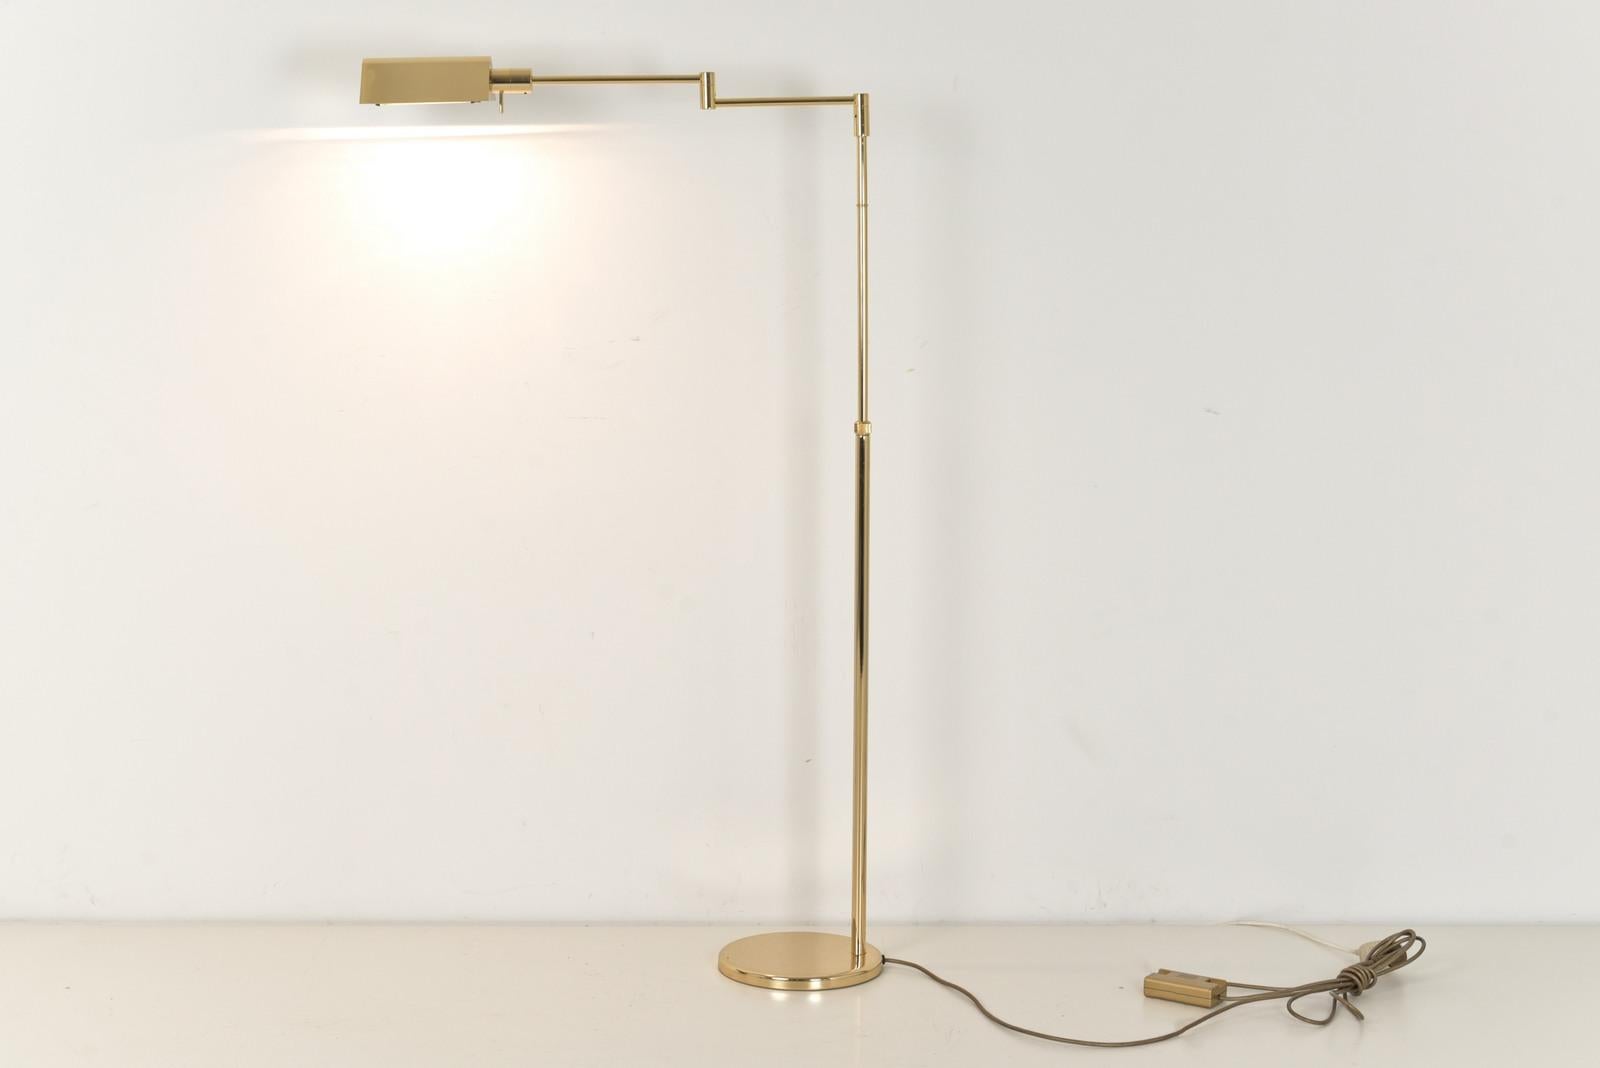 Designer: Factory design

Dimensions: H 104 cm - 148 cm W 78 cm D 25 cm

Material: Brass high-gloss polished and protective lacquered, golden connection cable with cord dimmer, lighting rod halogen 200 watt behind protective glass.

Condition: Good